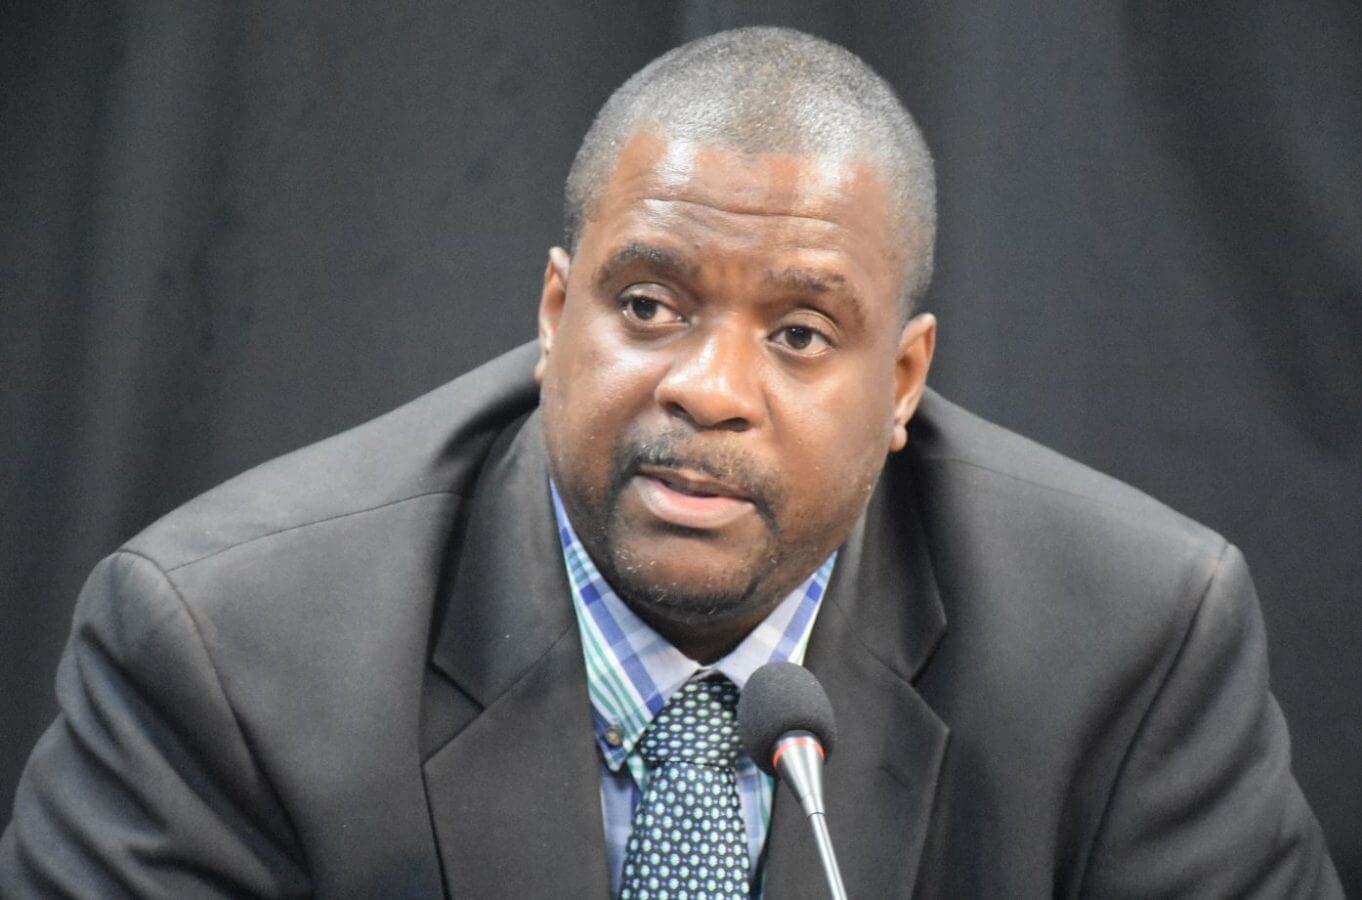 FORMER BVI PREMIER FAHIE SIGNS EXTRADITION WAIVER